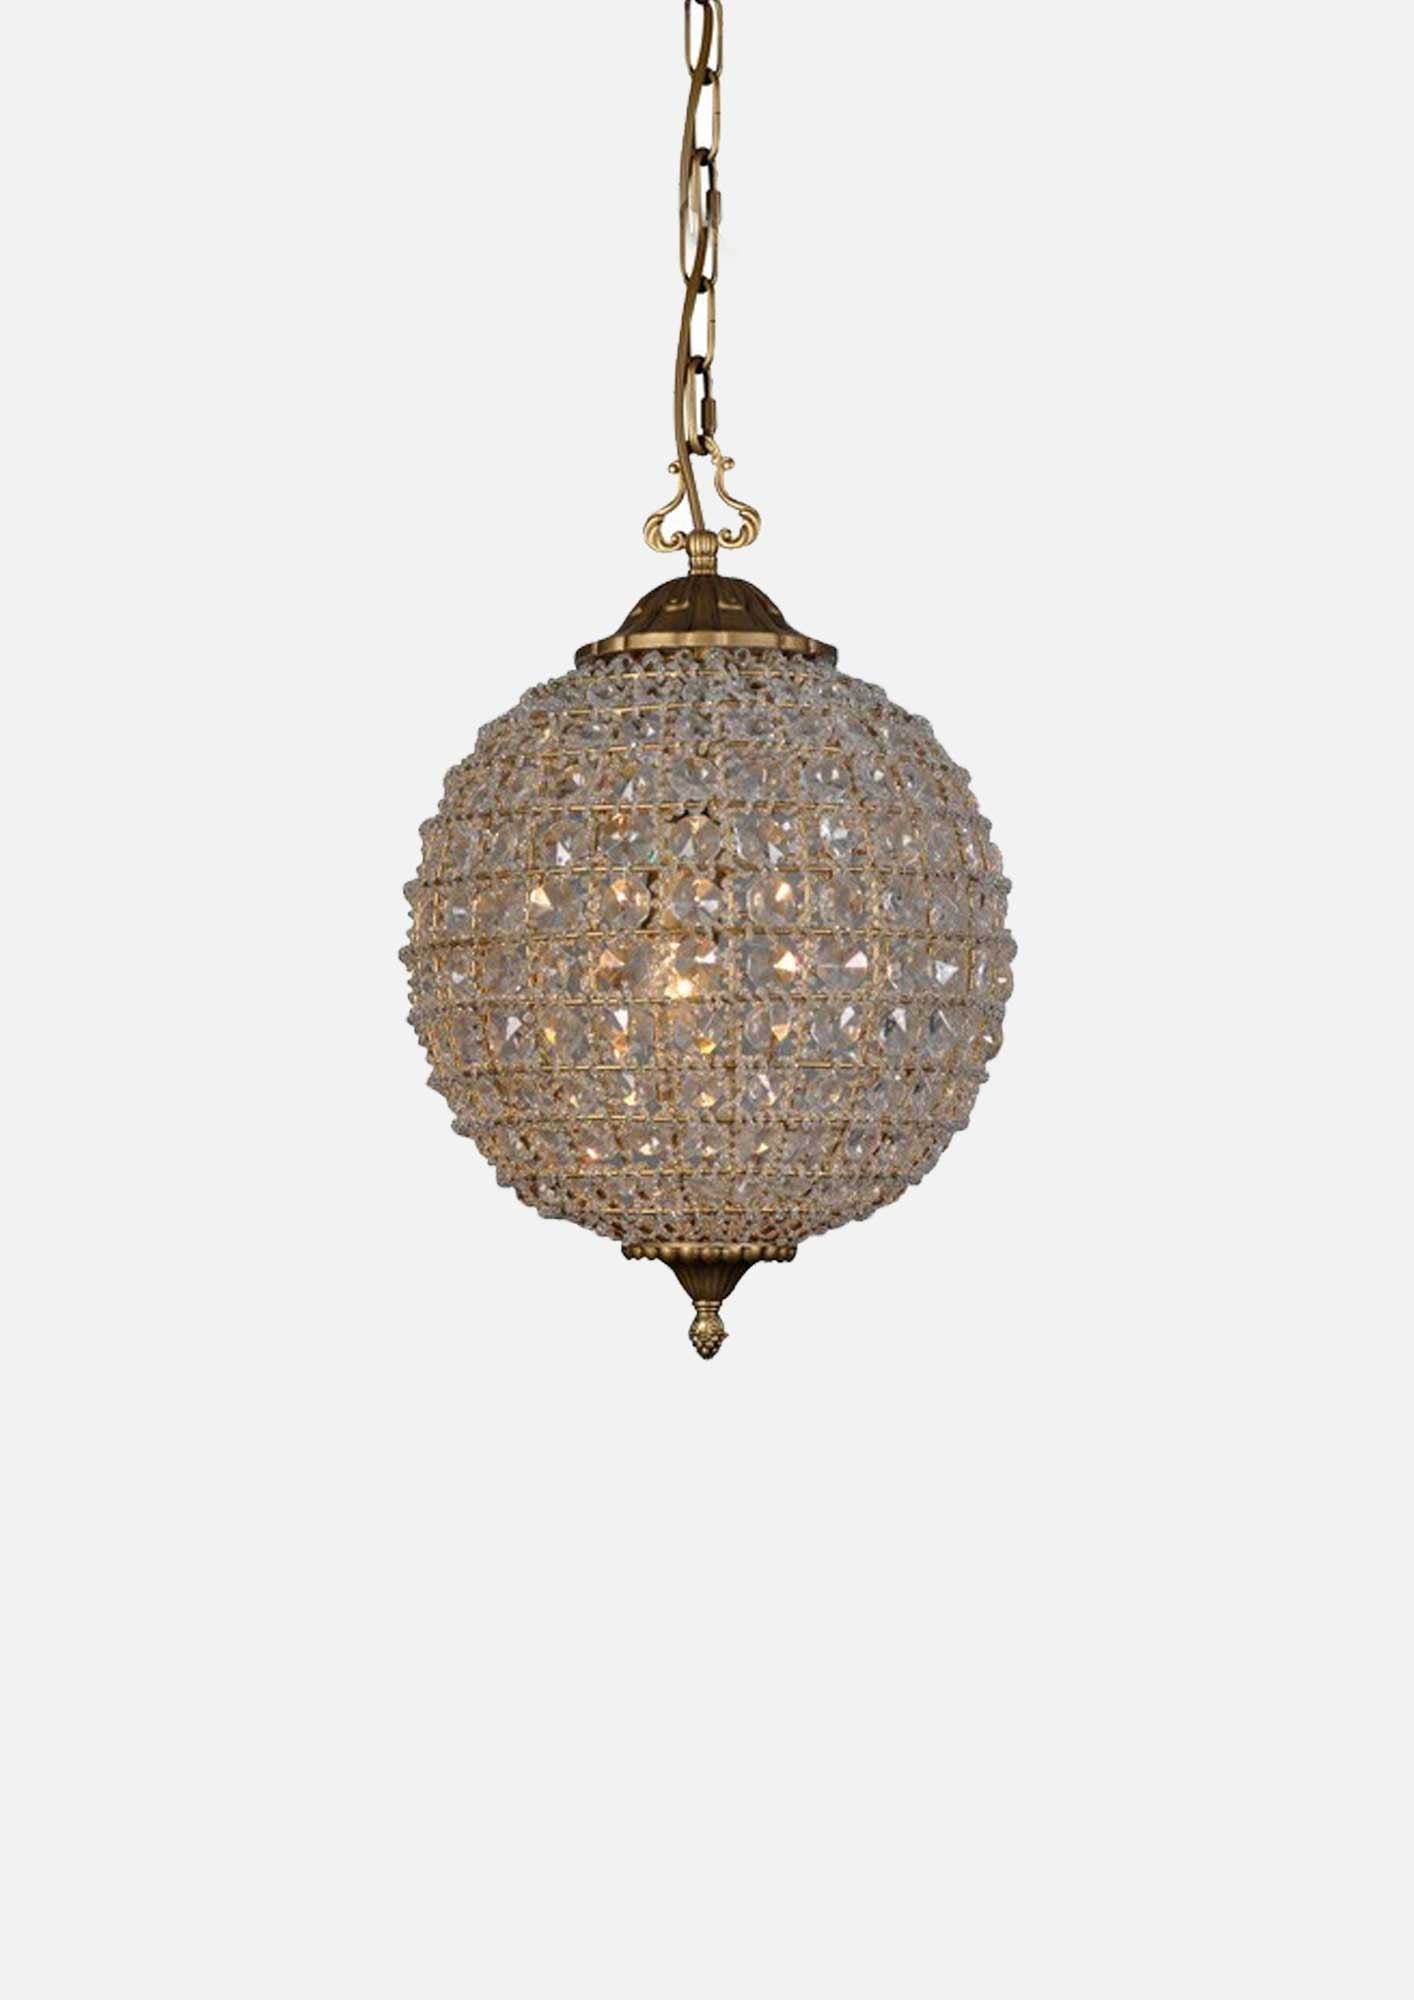 Orb Antique Chandelier Small